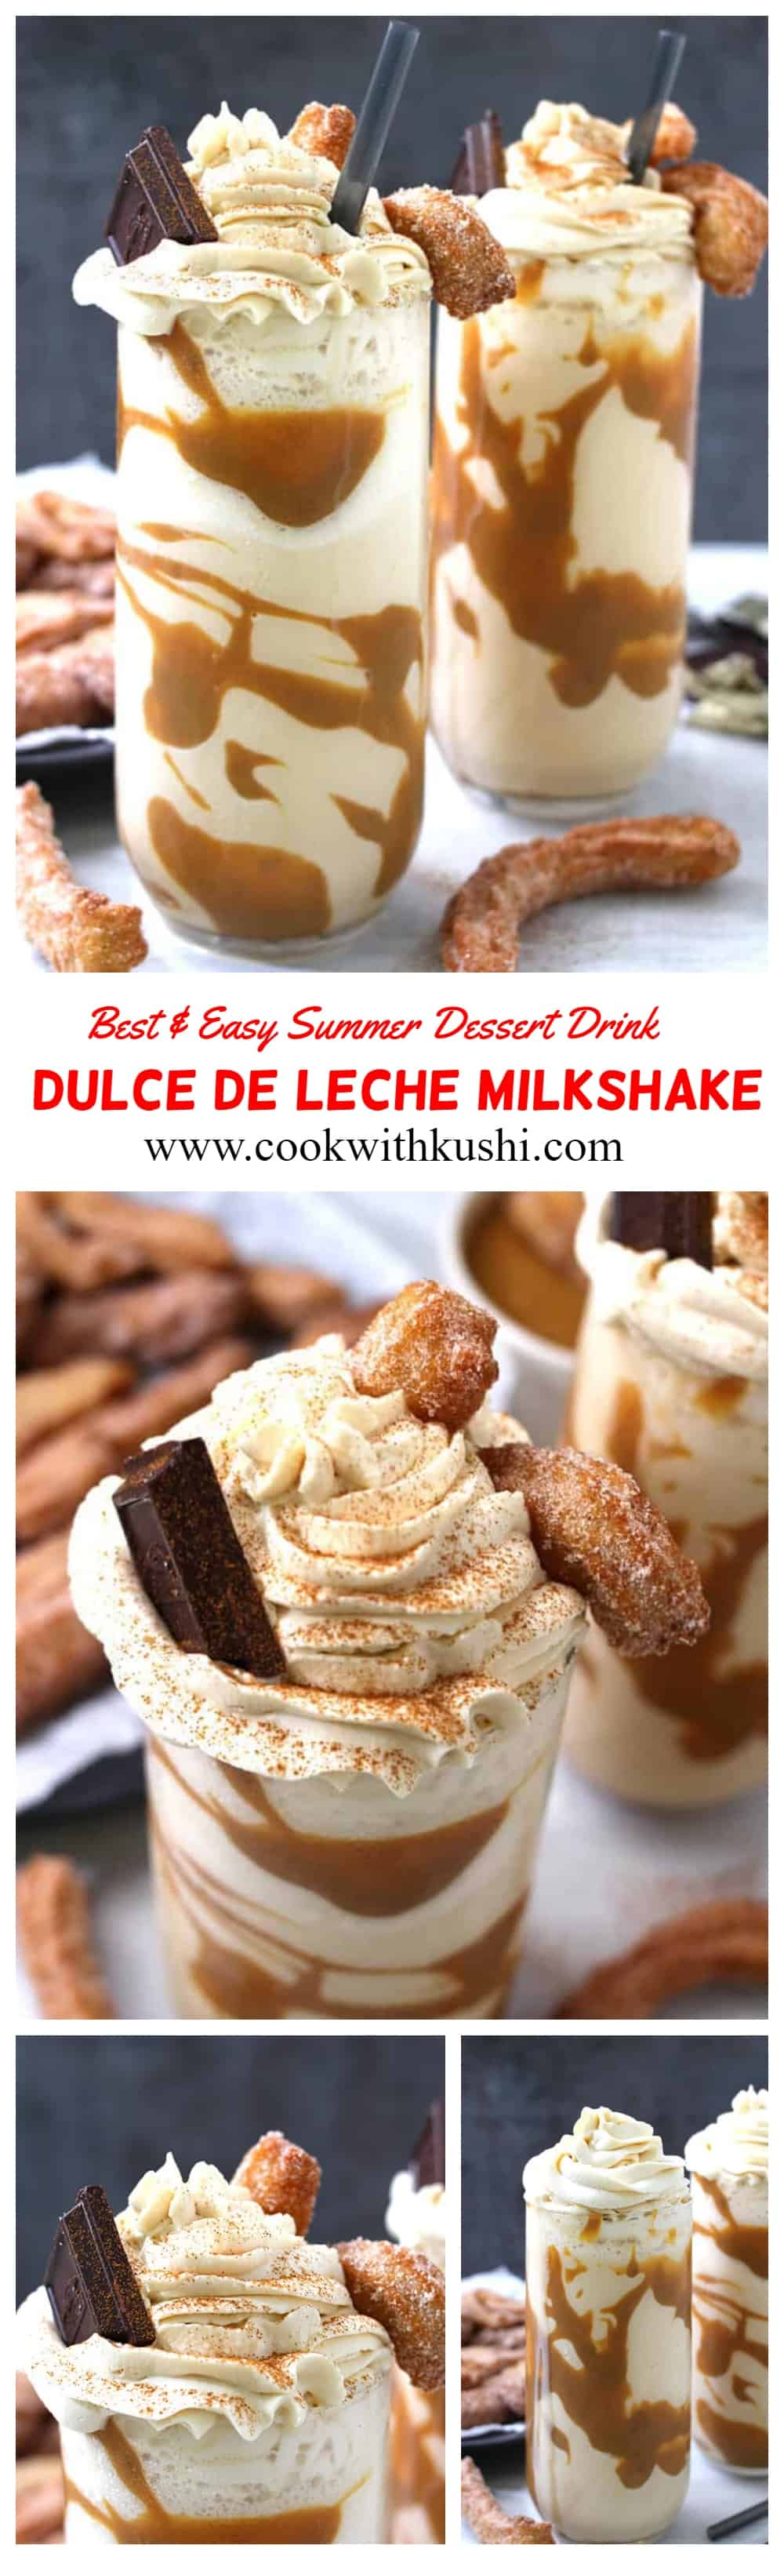 Dulce De Leche Milkshake is a intensely delicious, creamy, and thick milkshake filled with flavor and goodness of caramel, topped with churros and chocolate - all in one glass. #milkshake #dessertdrinks #summerdesserts #caramel #dulcedeleche #cincodemayo #4thofjuly #summerdrinks #whippedcream #churros #fancydesserts #romanticdates